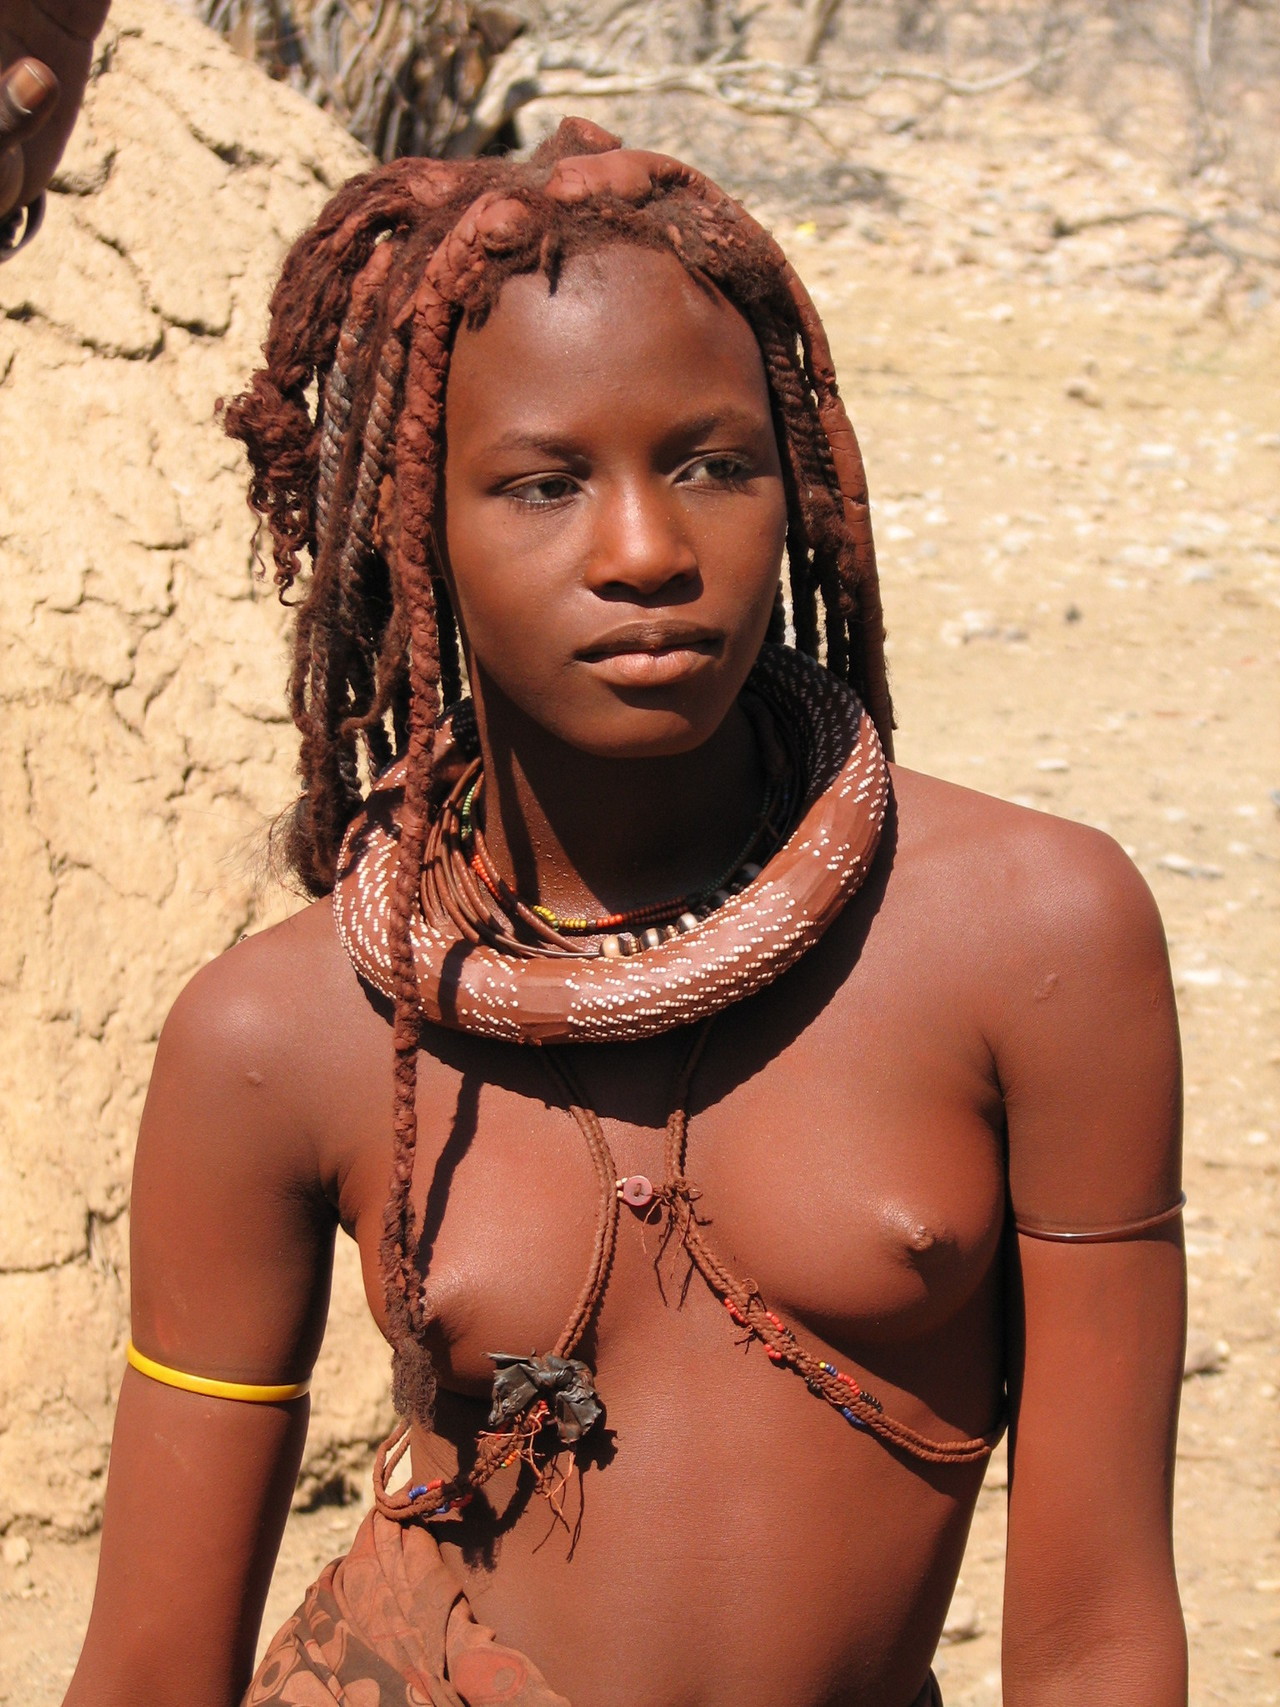 African tribe sex